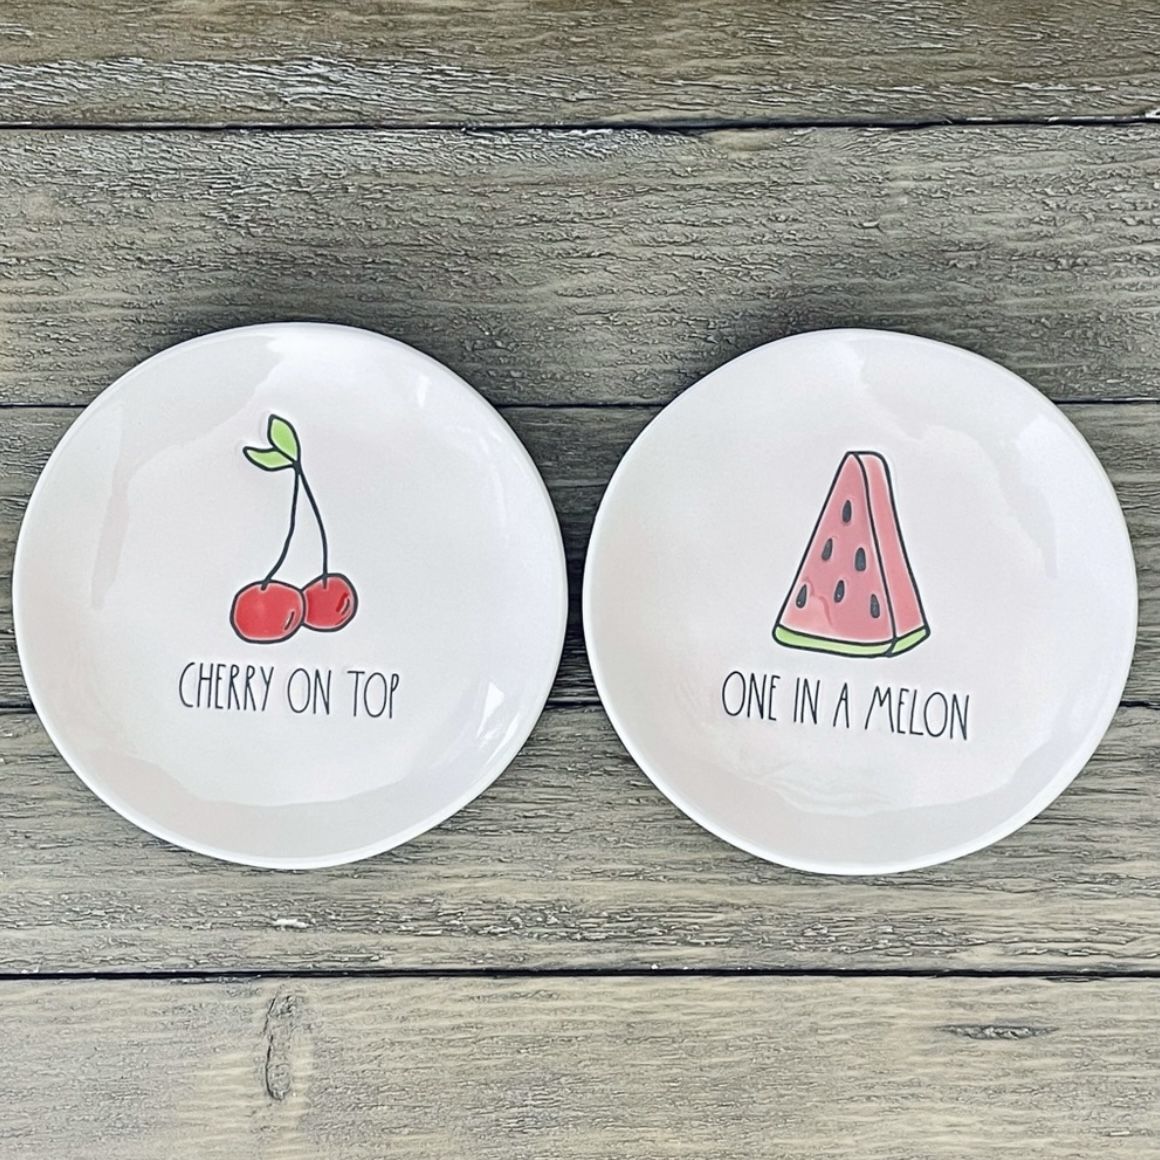 NEW Rae Dunn CHERRY ON TOP & ONE IN A MELON Sweets Small Desserts Pink Plates Couple Set Gift